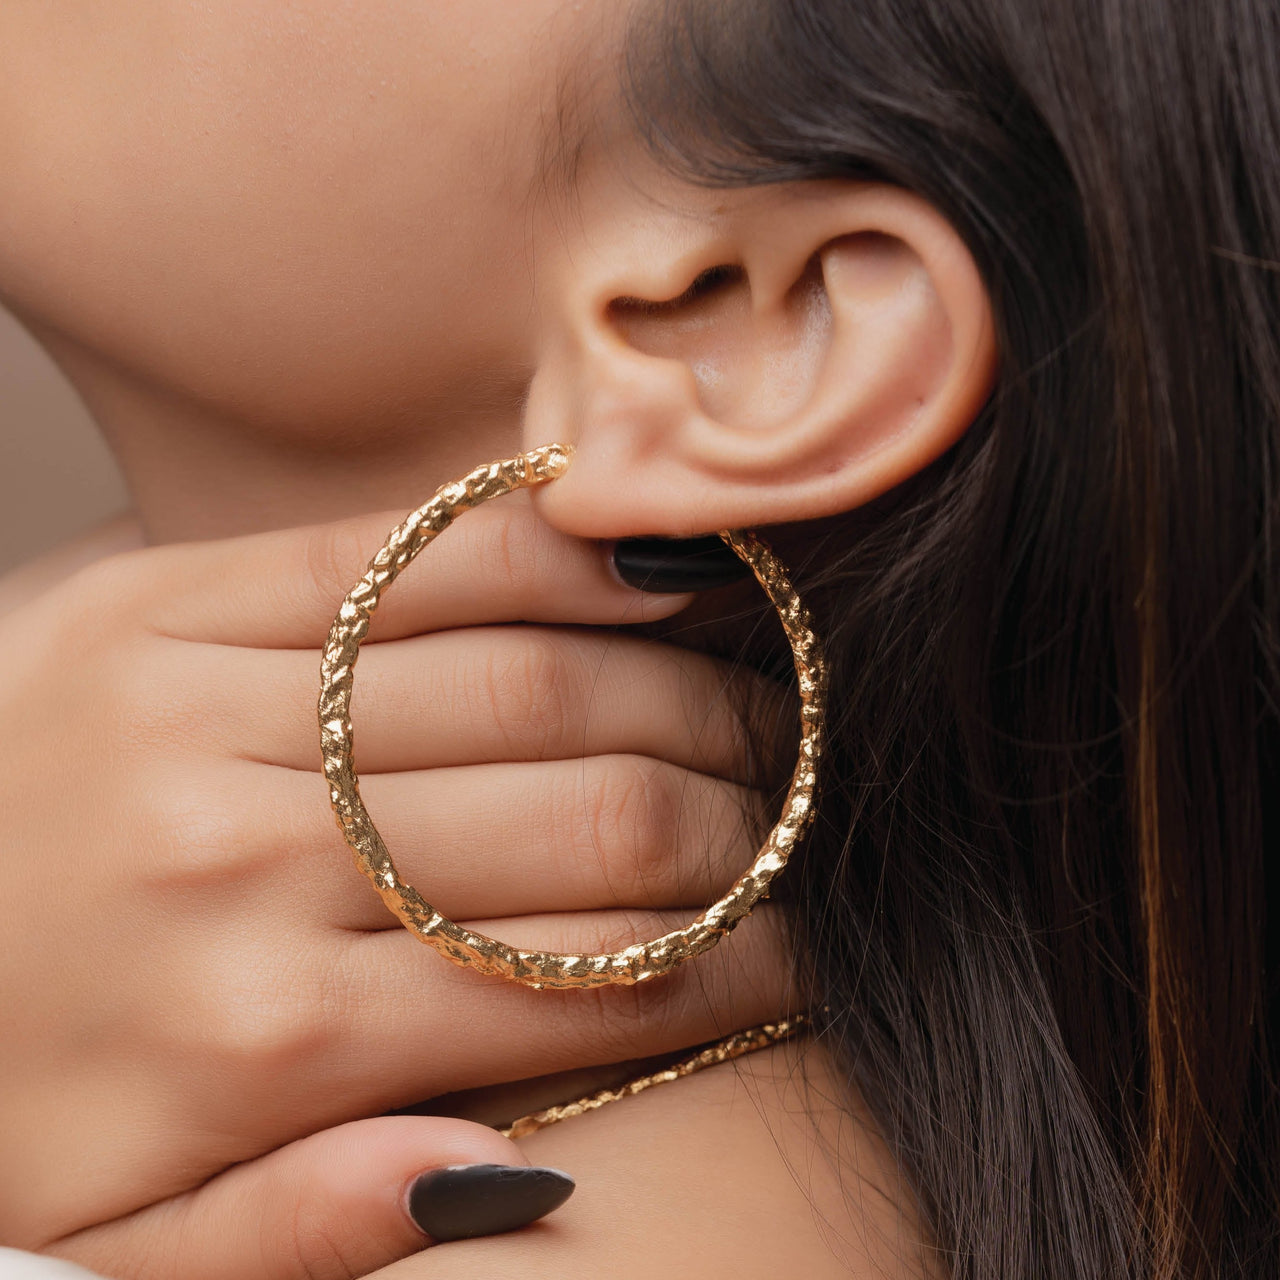 Gift for your fashionista girlfriend - Hoop Earrings